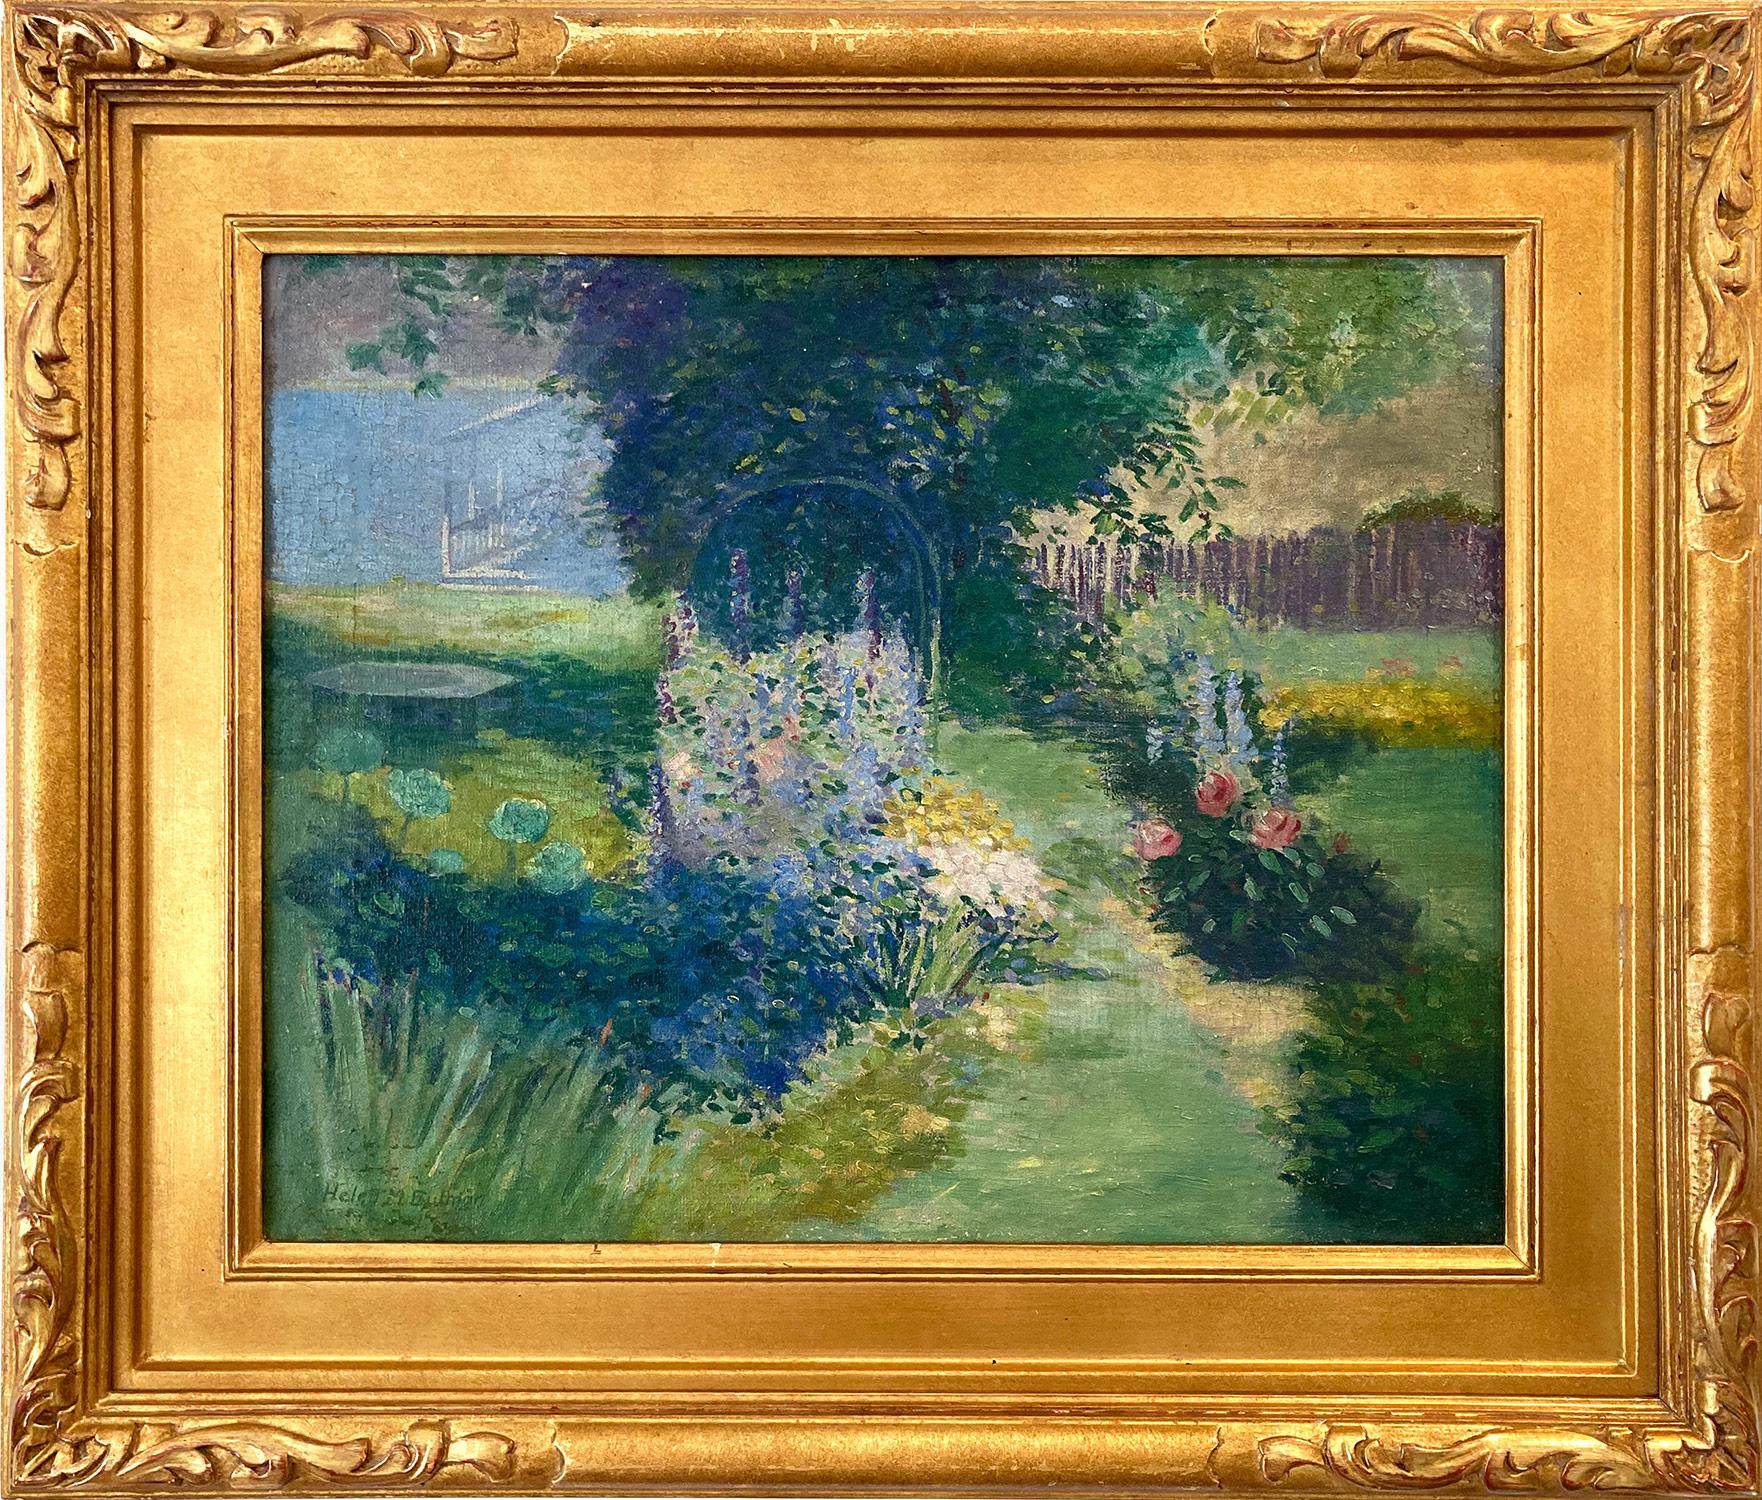 Helen M Butman Landscape Painting - "Flower Garden by the Water" 20th Century Impressionist Oil Painting on Canvas